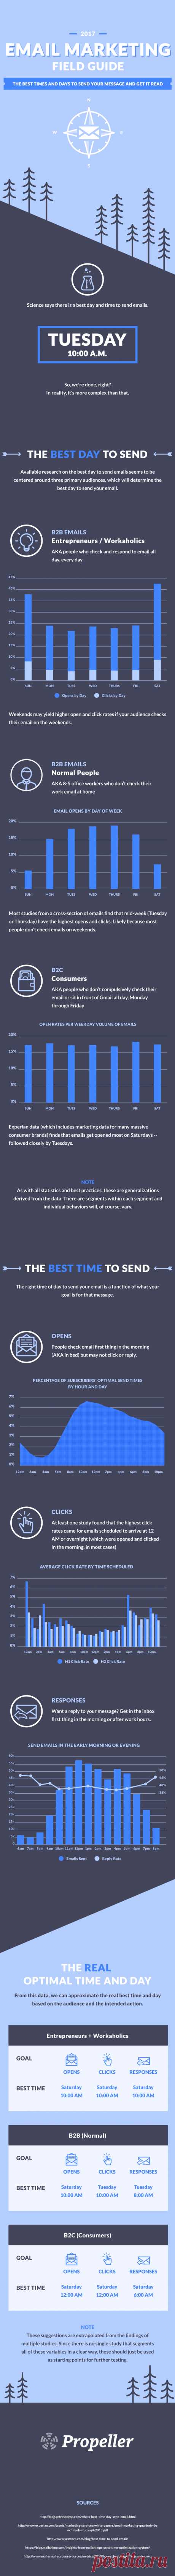 Email Marketing Tips: The Best Days & Times to Send Your Emails [Infographic] - Red Website Design Blog